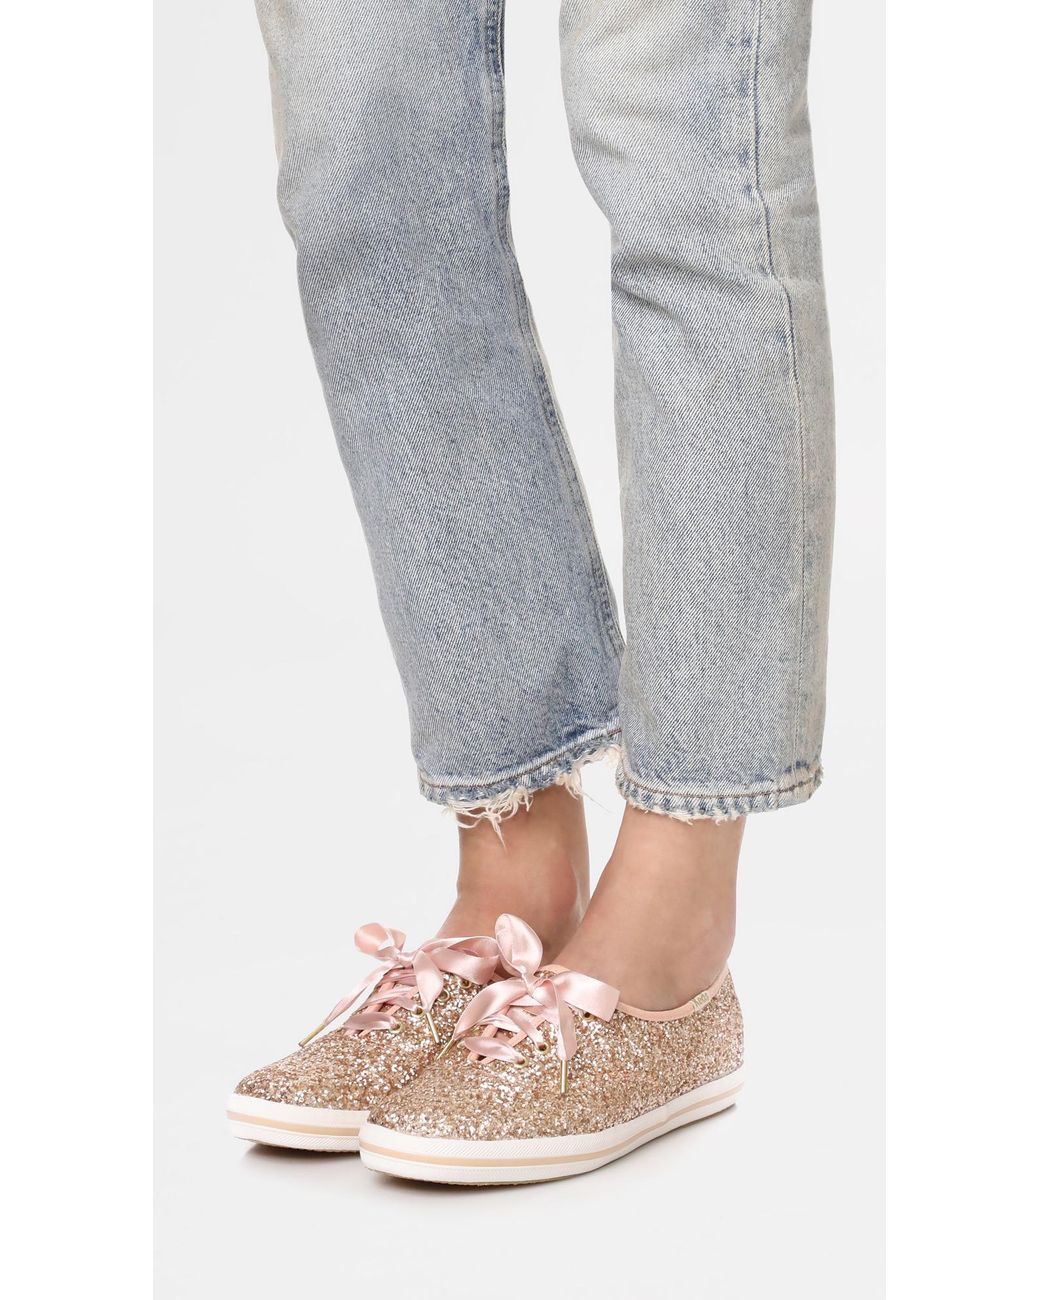 Keds Canvas X Kate Spade New York Glitter Sneakers in Rose Gold (Pink) -  Save 25% - Lyst